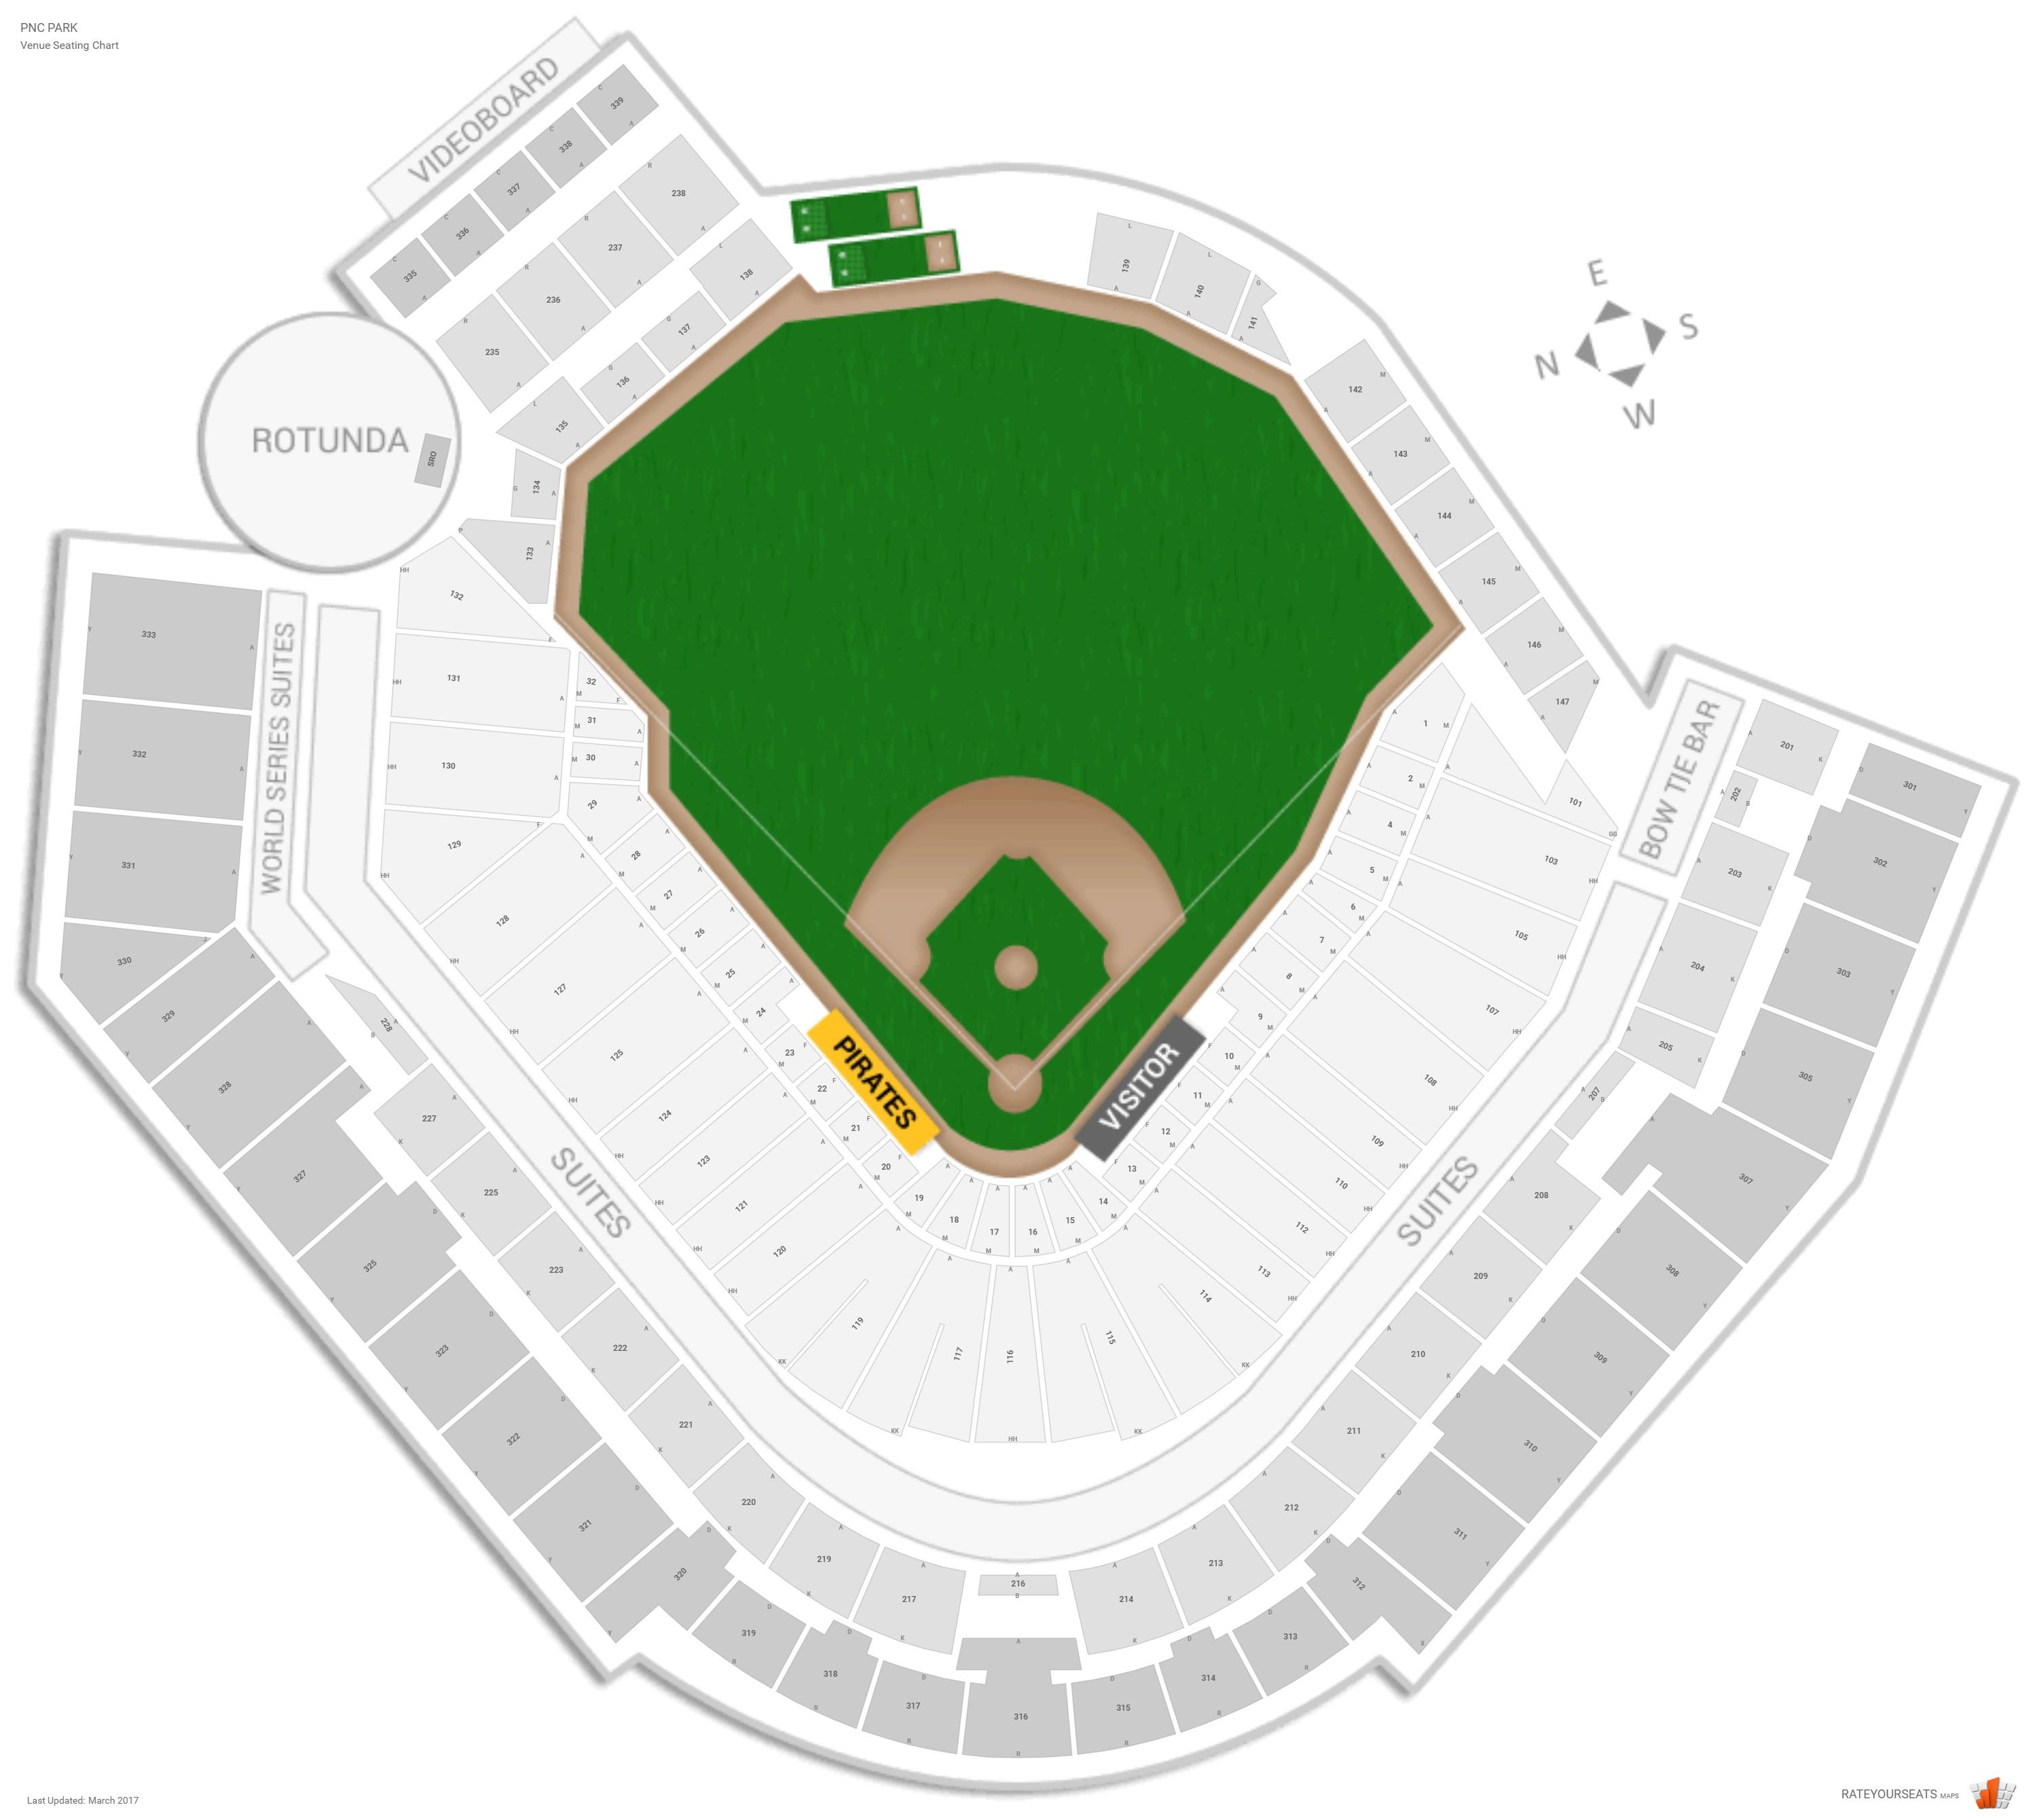 Pittsburgh Pirates Seating Guide - PNC Park - RateYourSeats.com